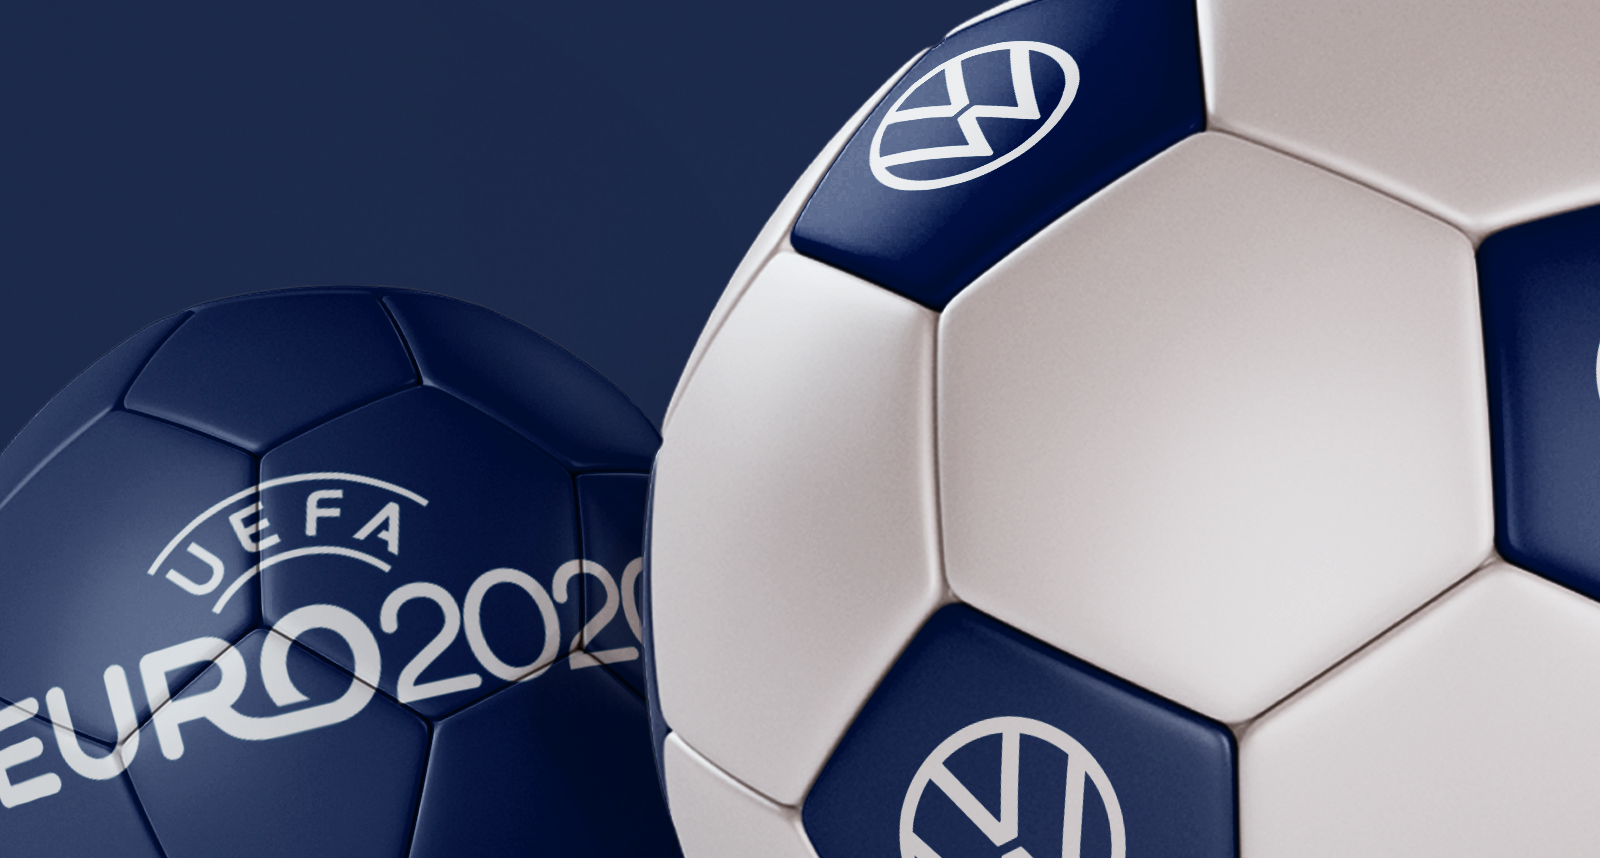 Videos and AR Mask for Volkswagen and EURO 2020 cover